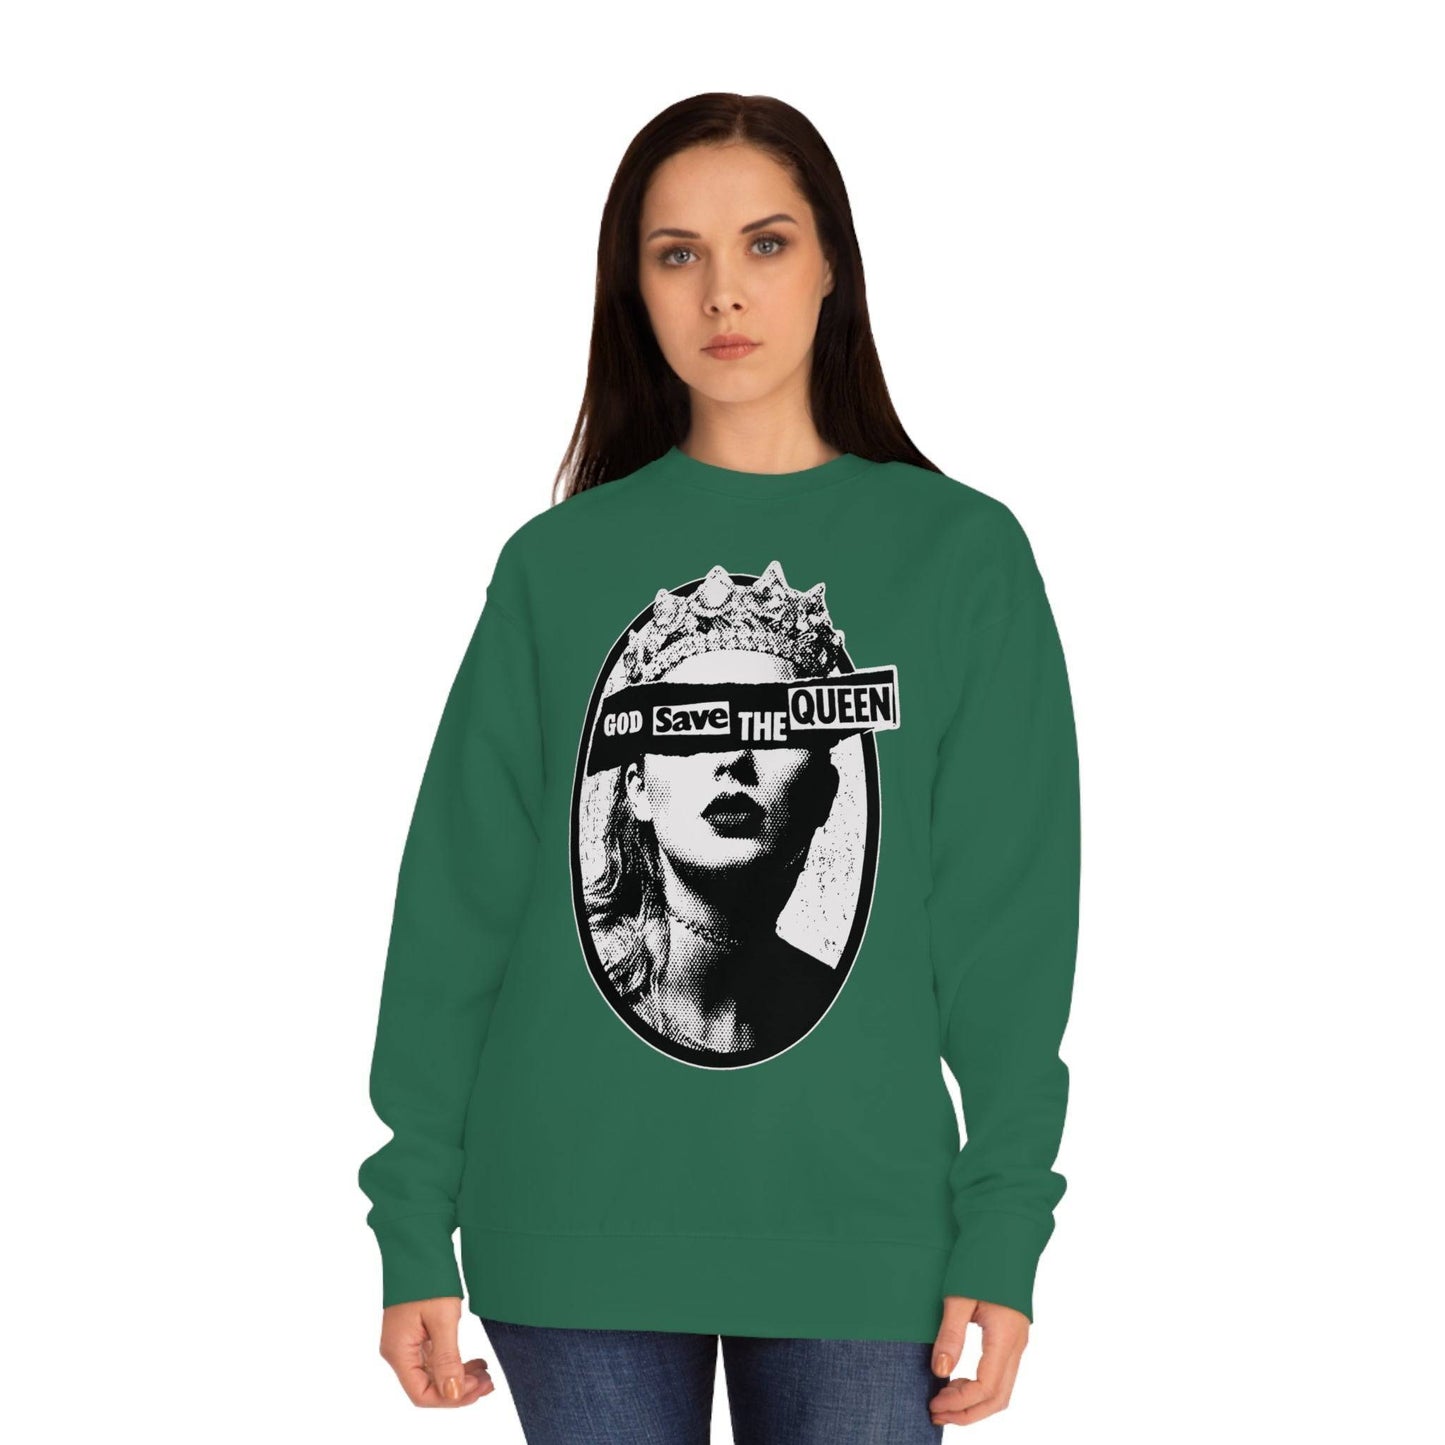 Taylor Swift | God Save The Queen | Unisex Sweatshirt Forest Green